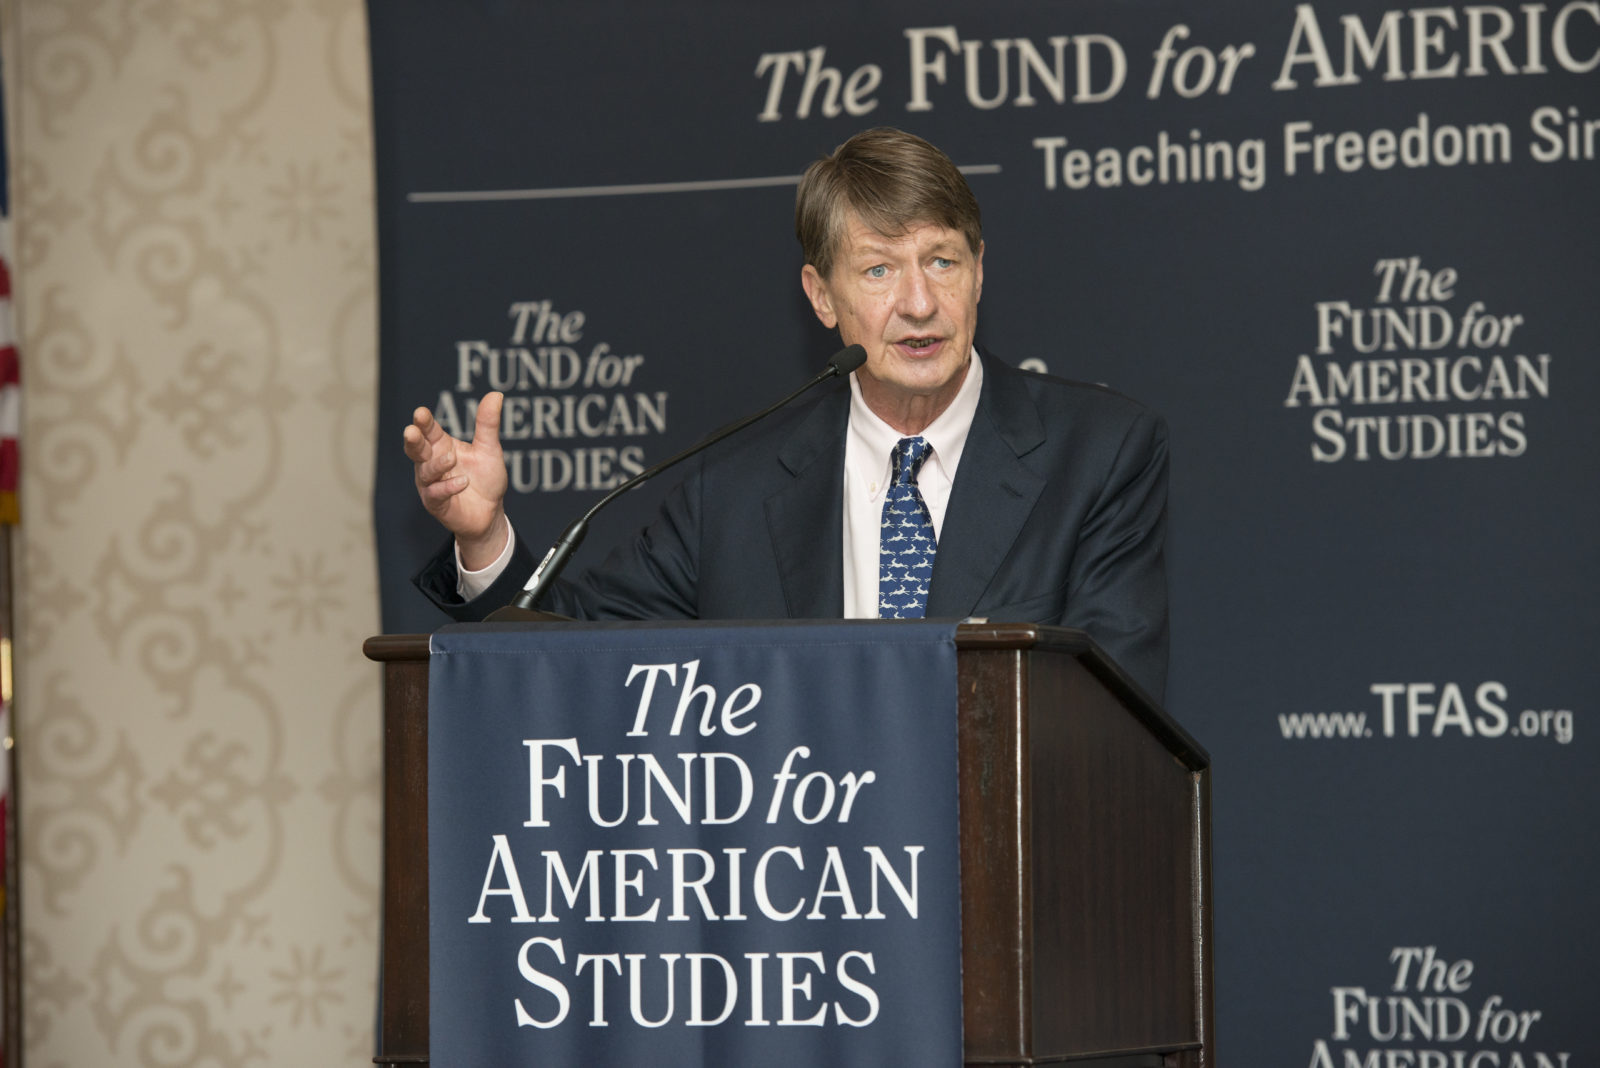 Journalist and Political Satirist P.J. O'Rourke entertains supporters, staff, alumni and students at the annual conference dinner at the Fairmont Hotel in downtown Washington, D.C.